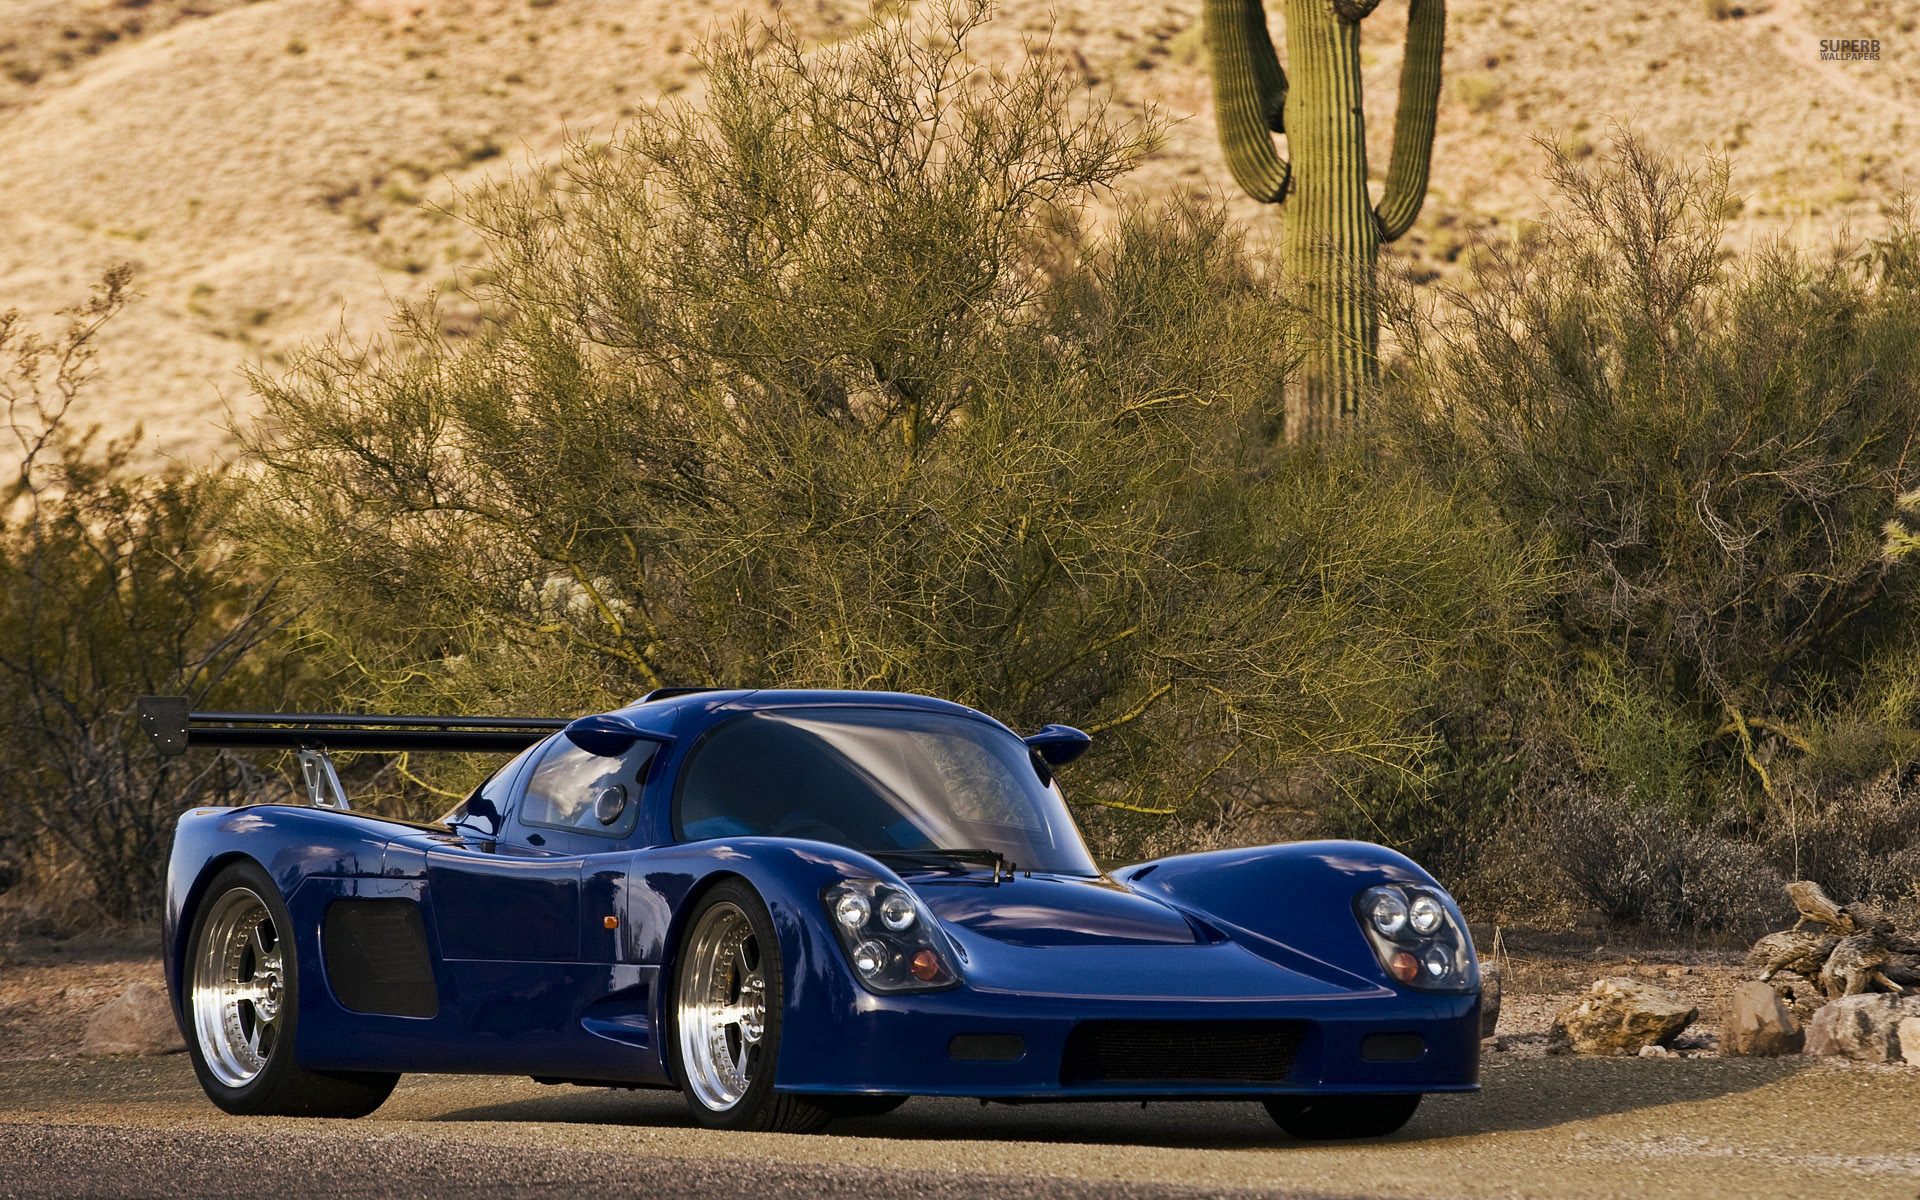 Ultima Gtr High Quality Background on Wallpapers Vista